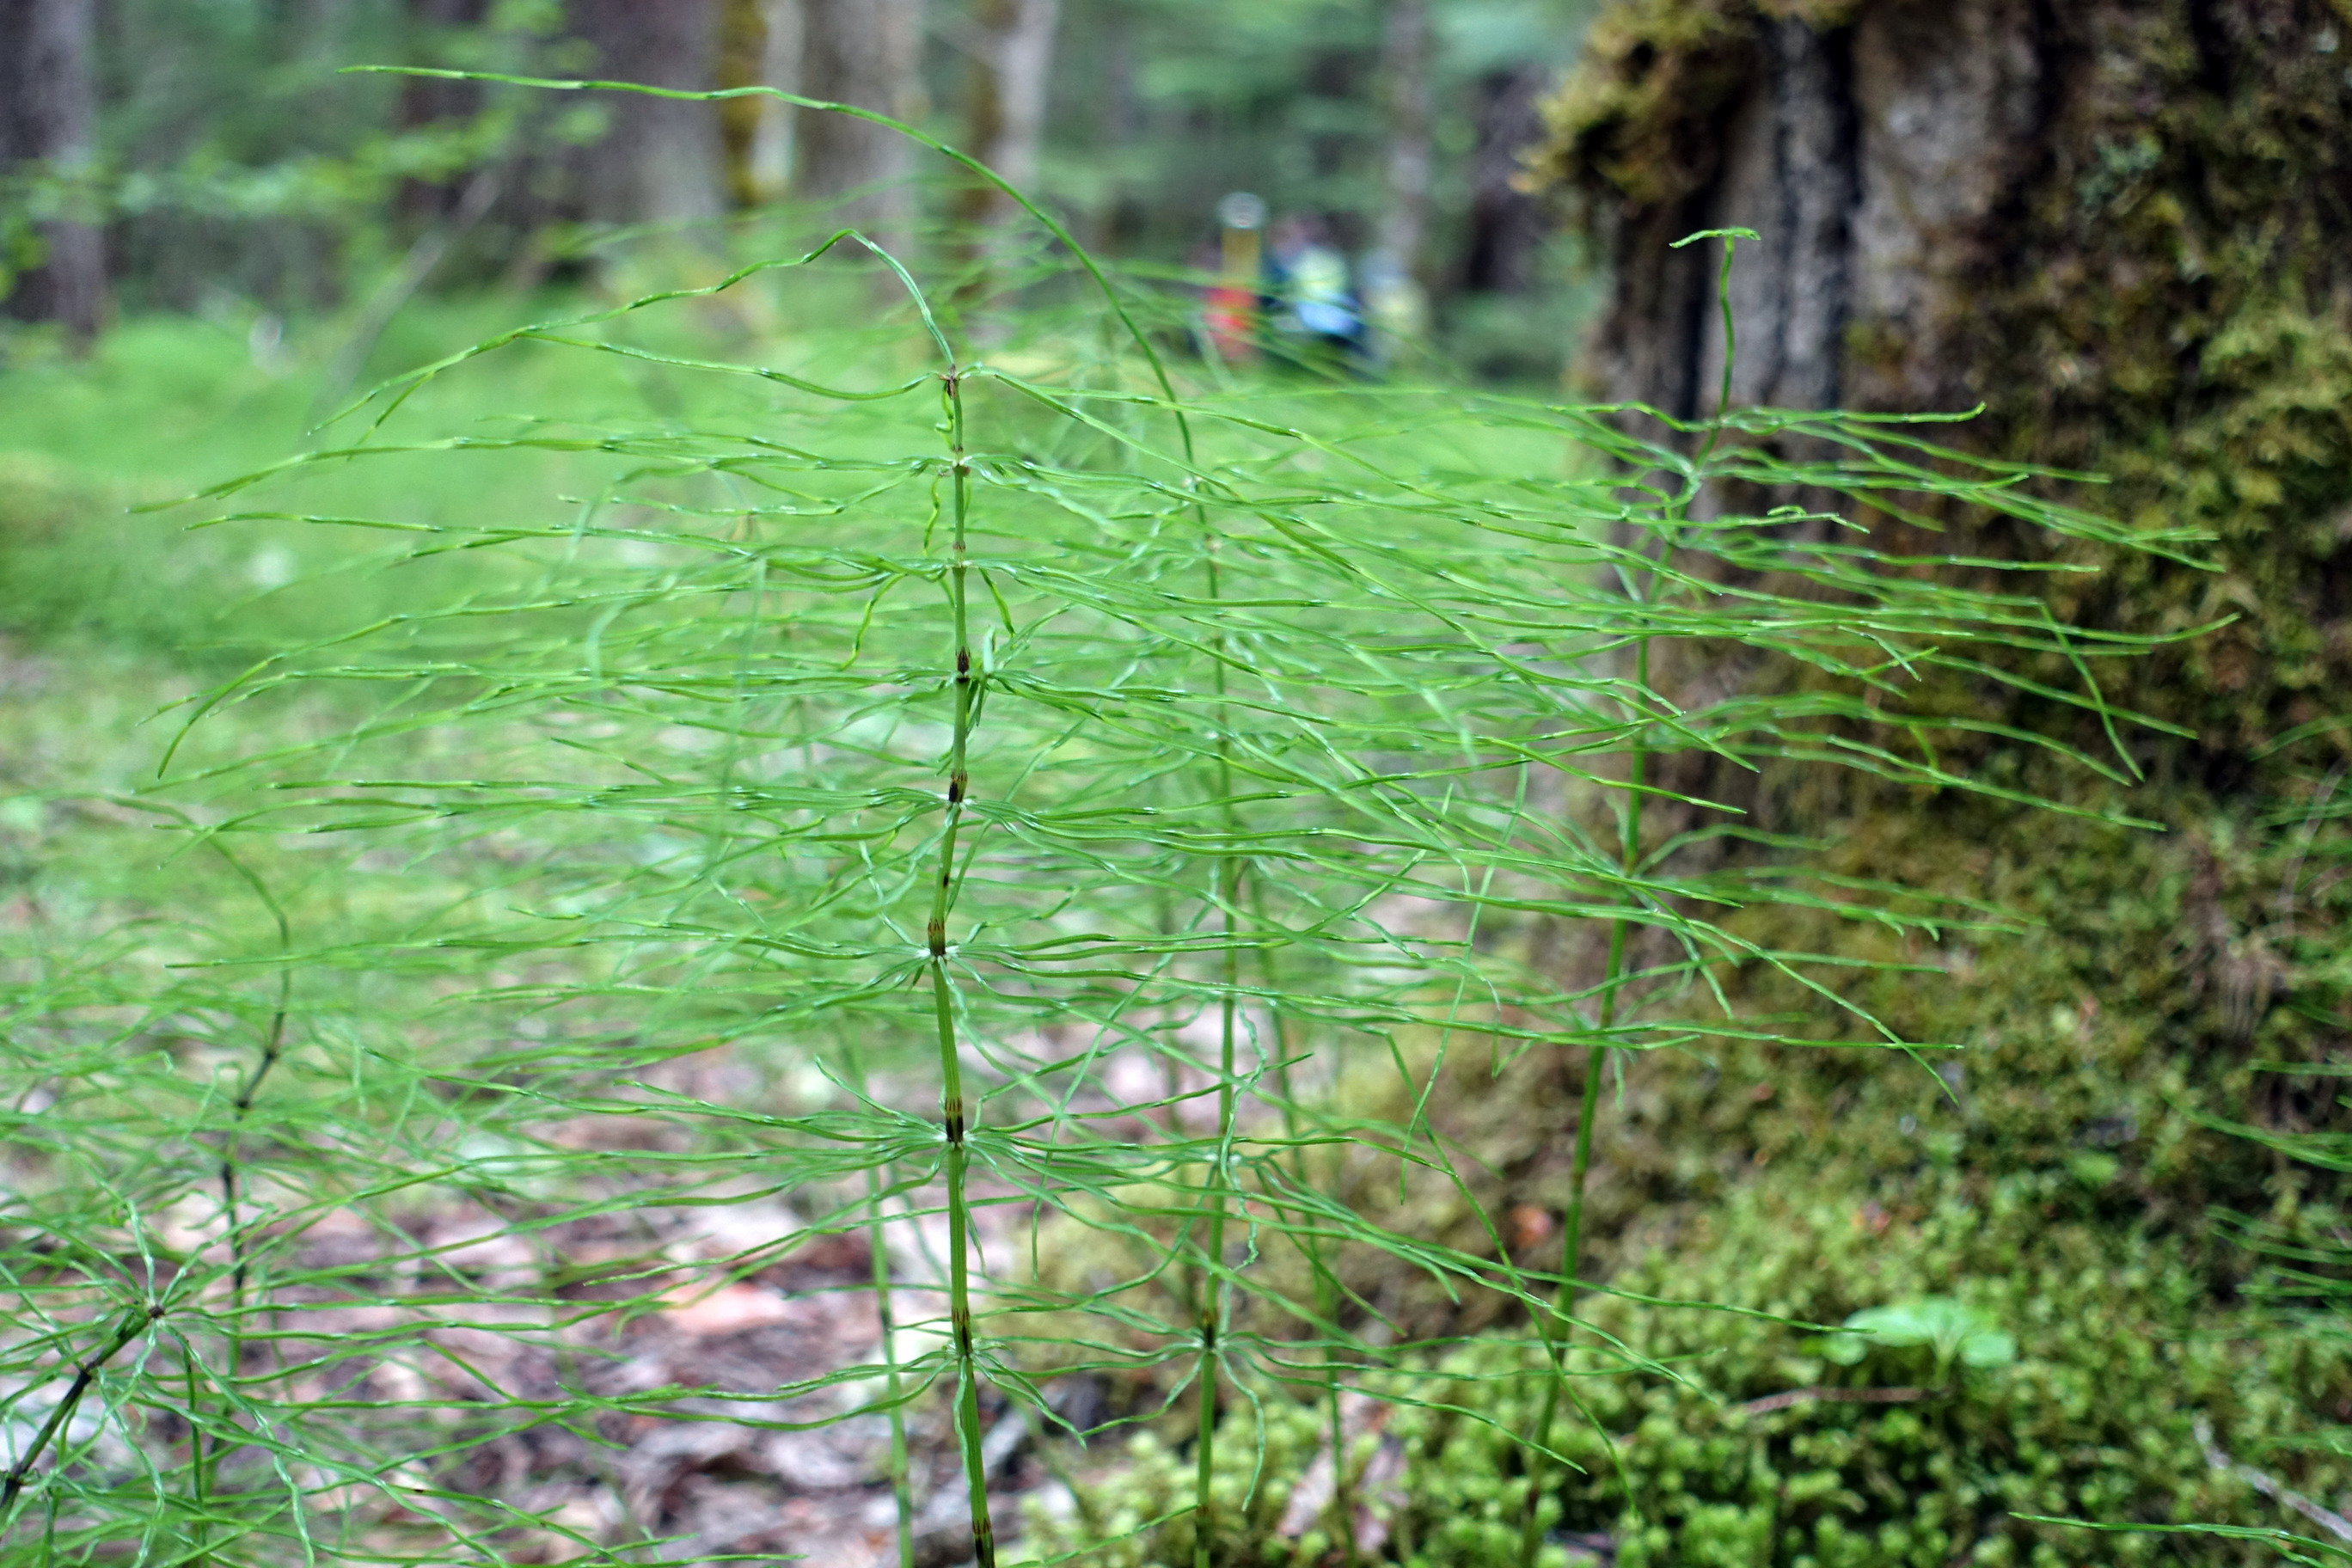 Close detail of fern growing next to a moss-covered tree trunk. Blurry fieldworkers in the background.